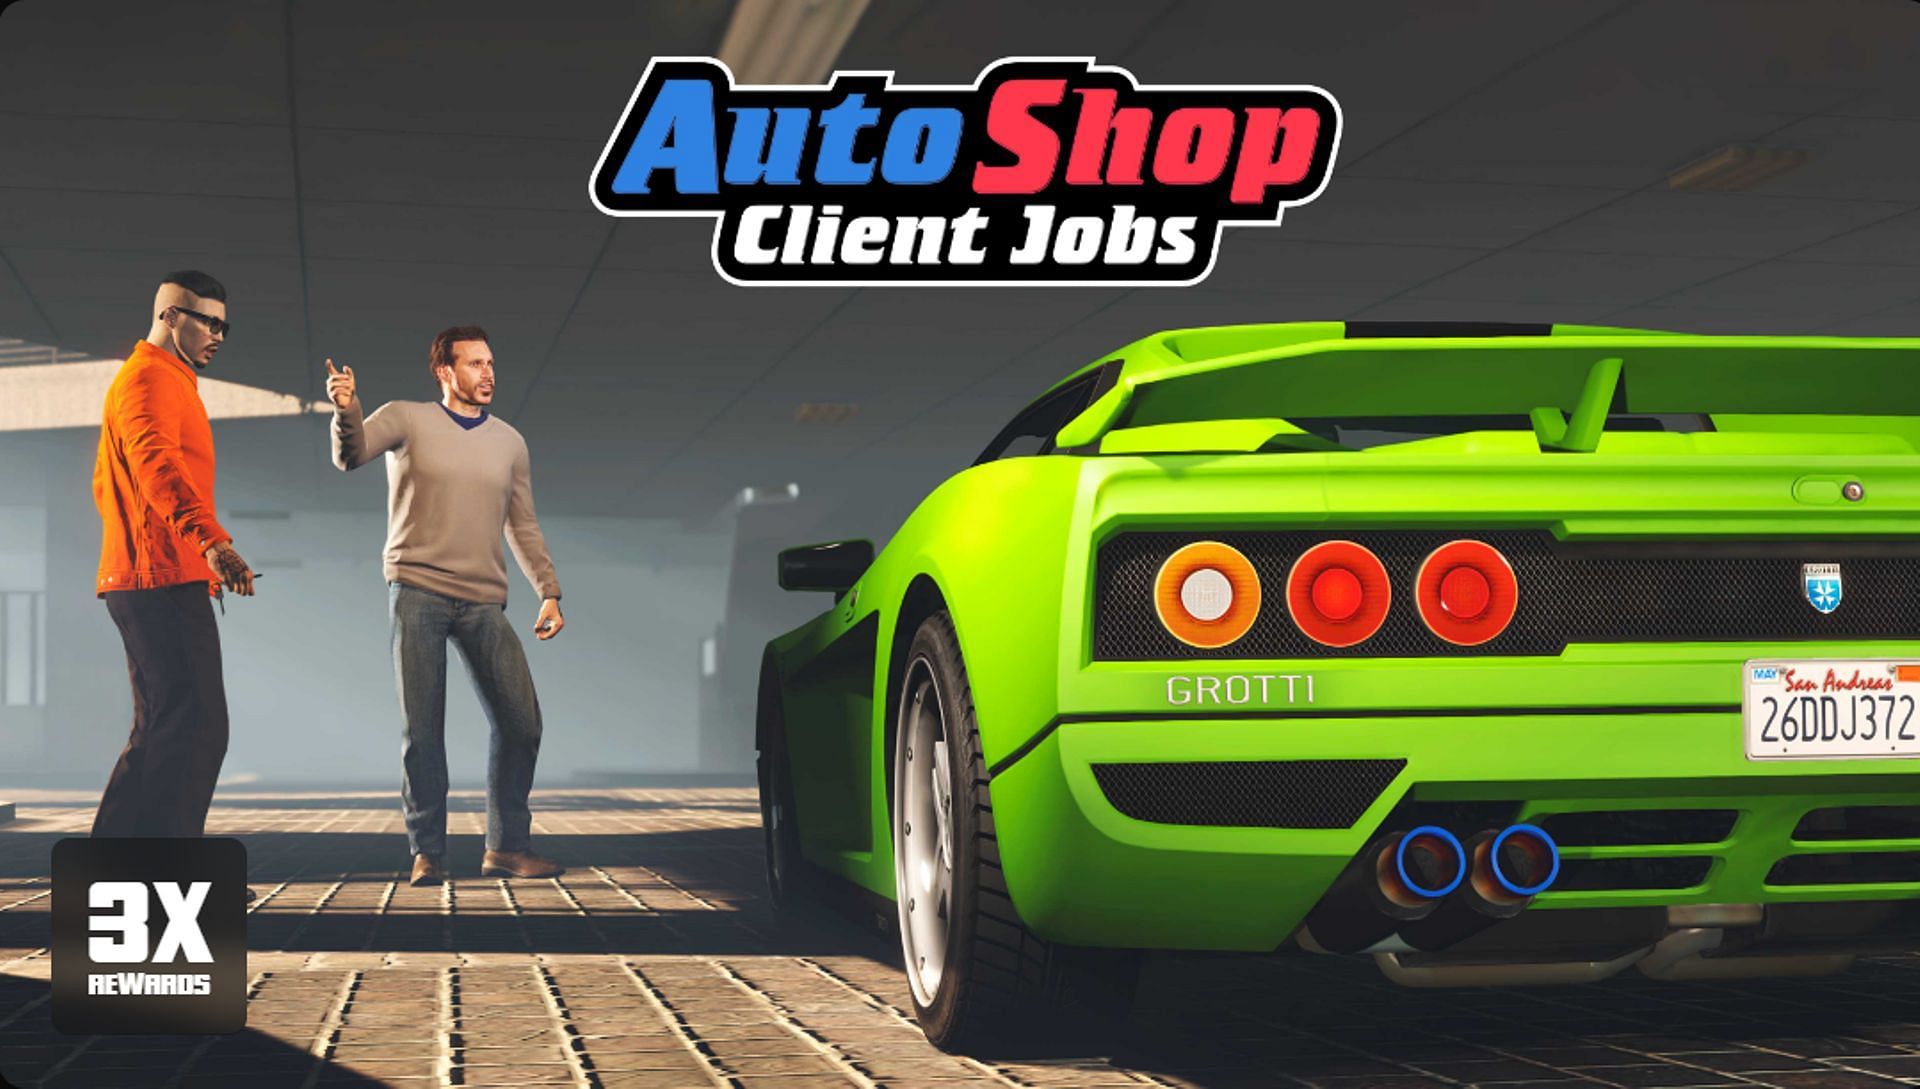 Earn 3x cash and RP with these simple jobs in GTA Online (Image via Rockstar Games)